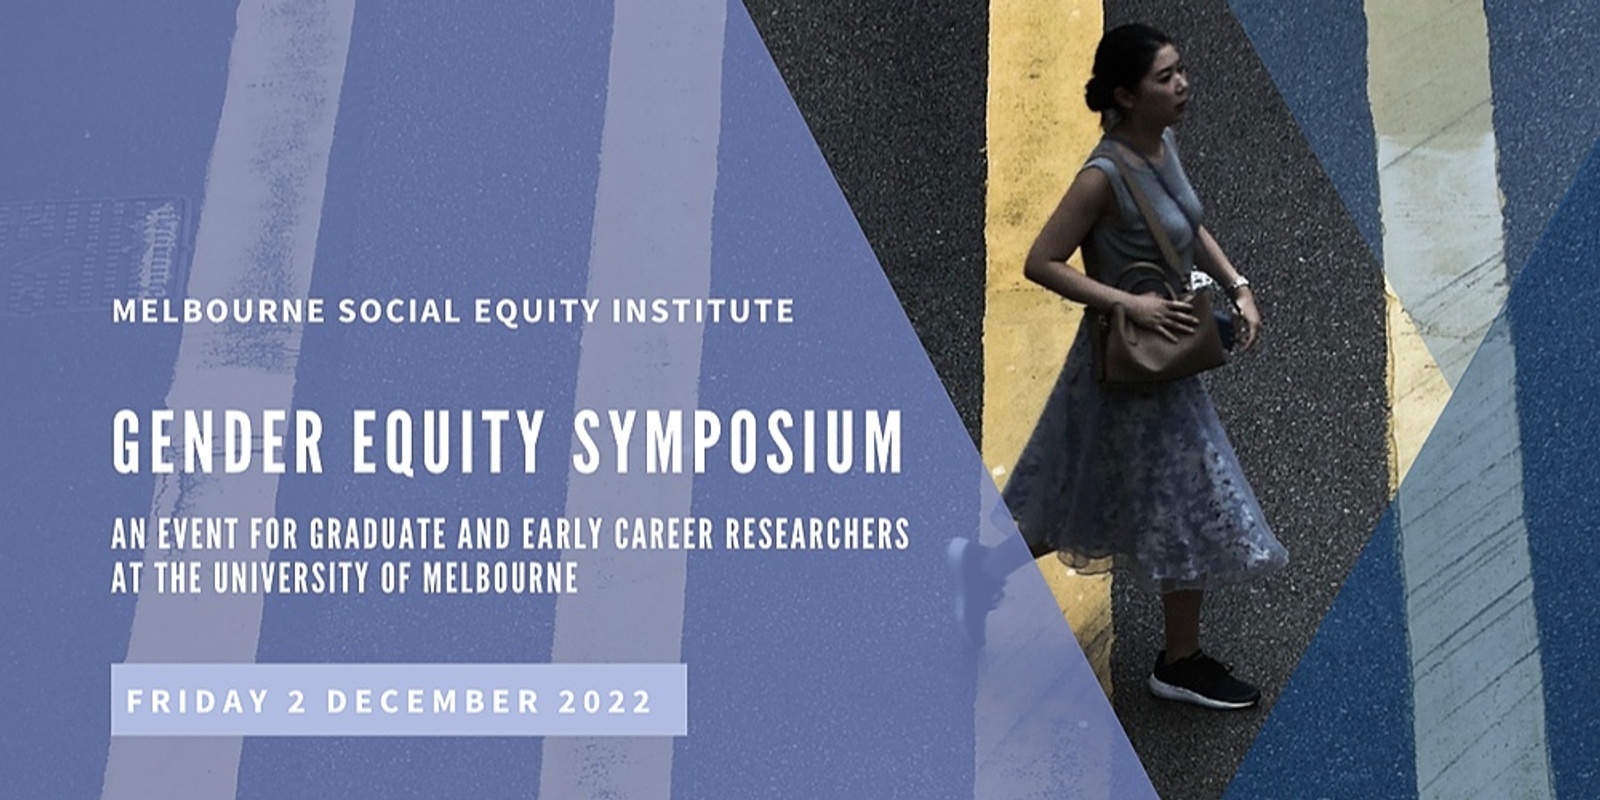 Gender Equity Symposium: An Event for Graduate and Early Career Researchers at the University of Melbourne